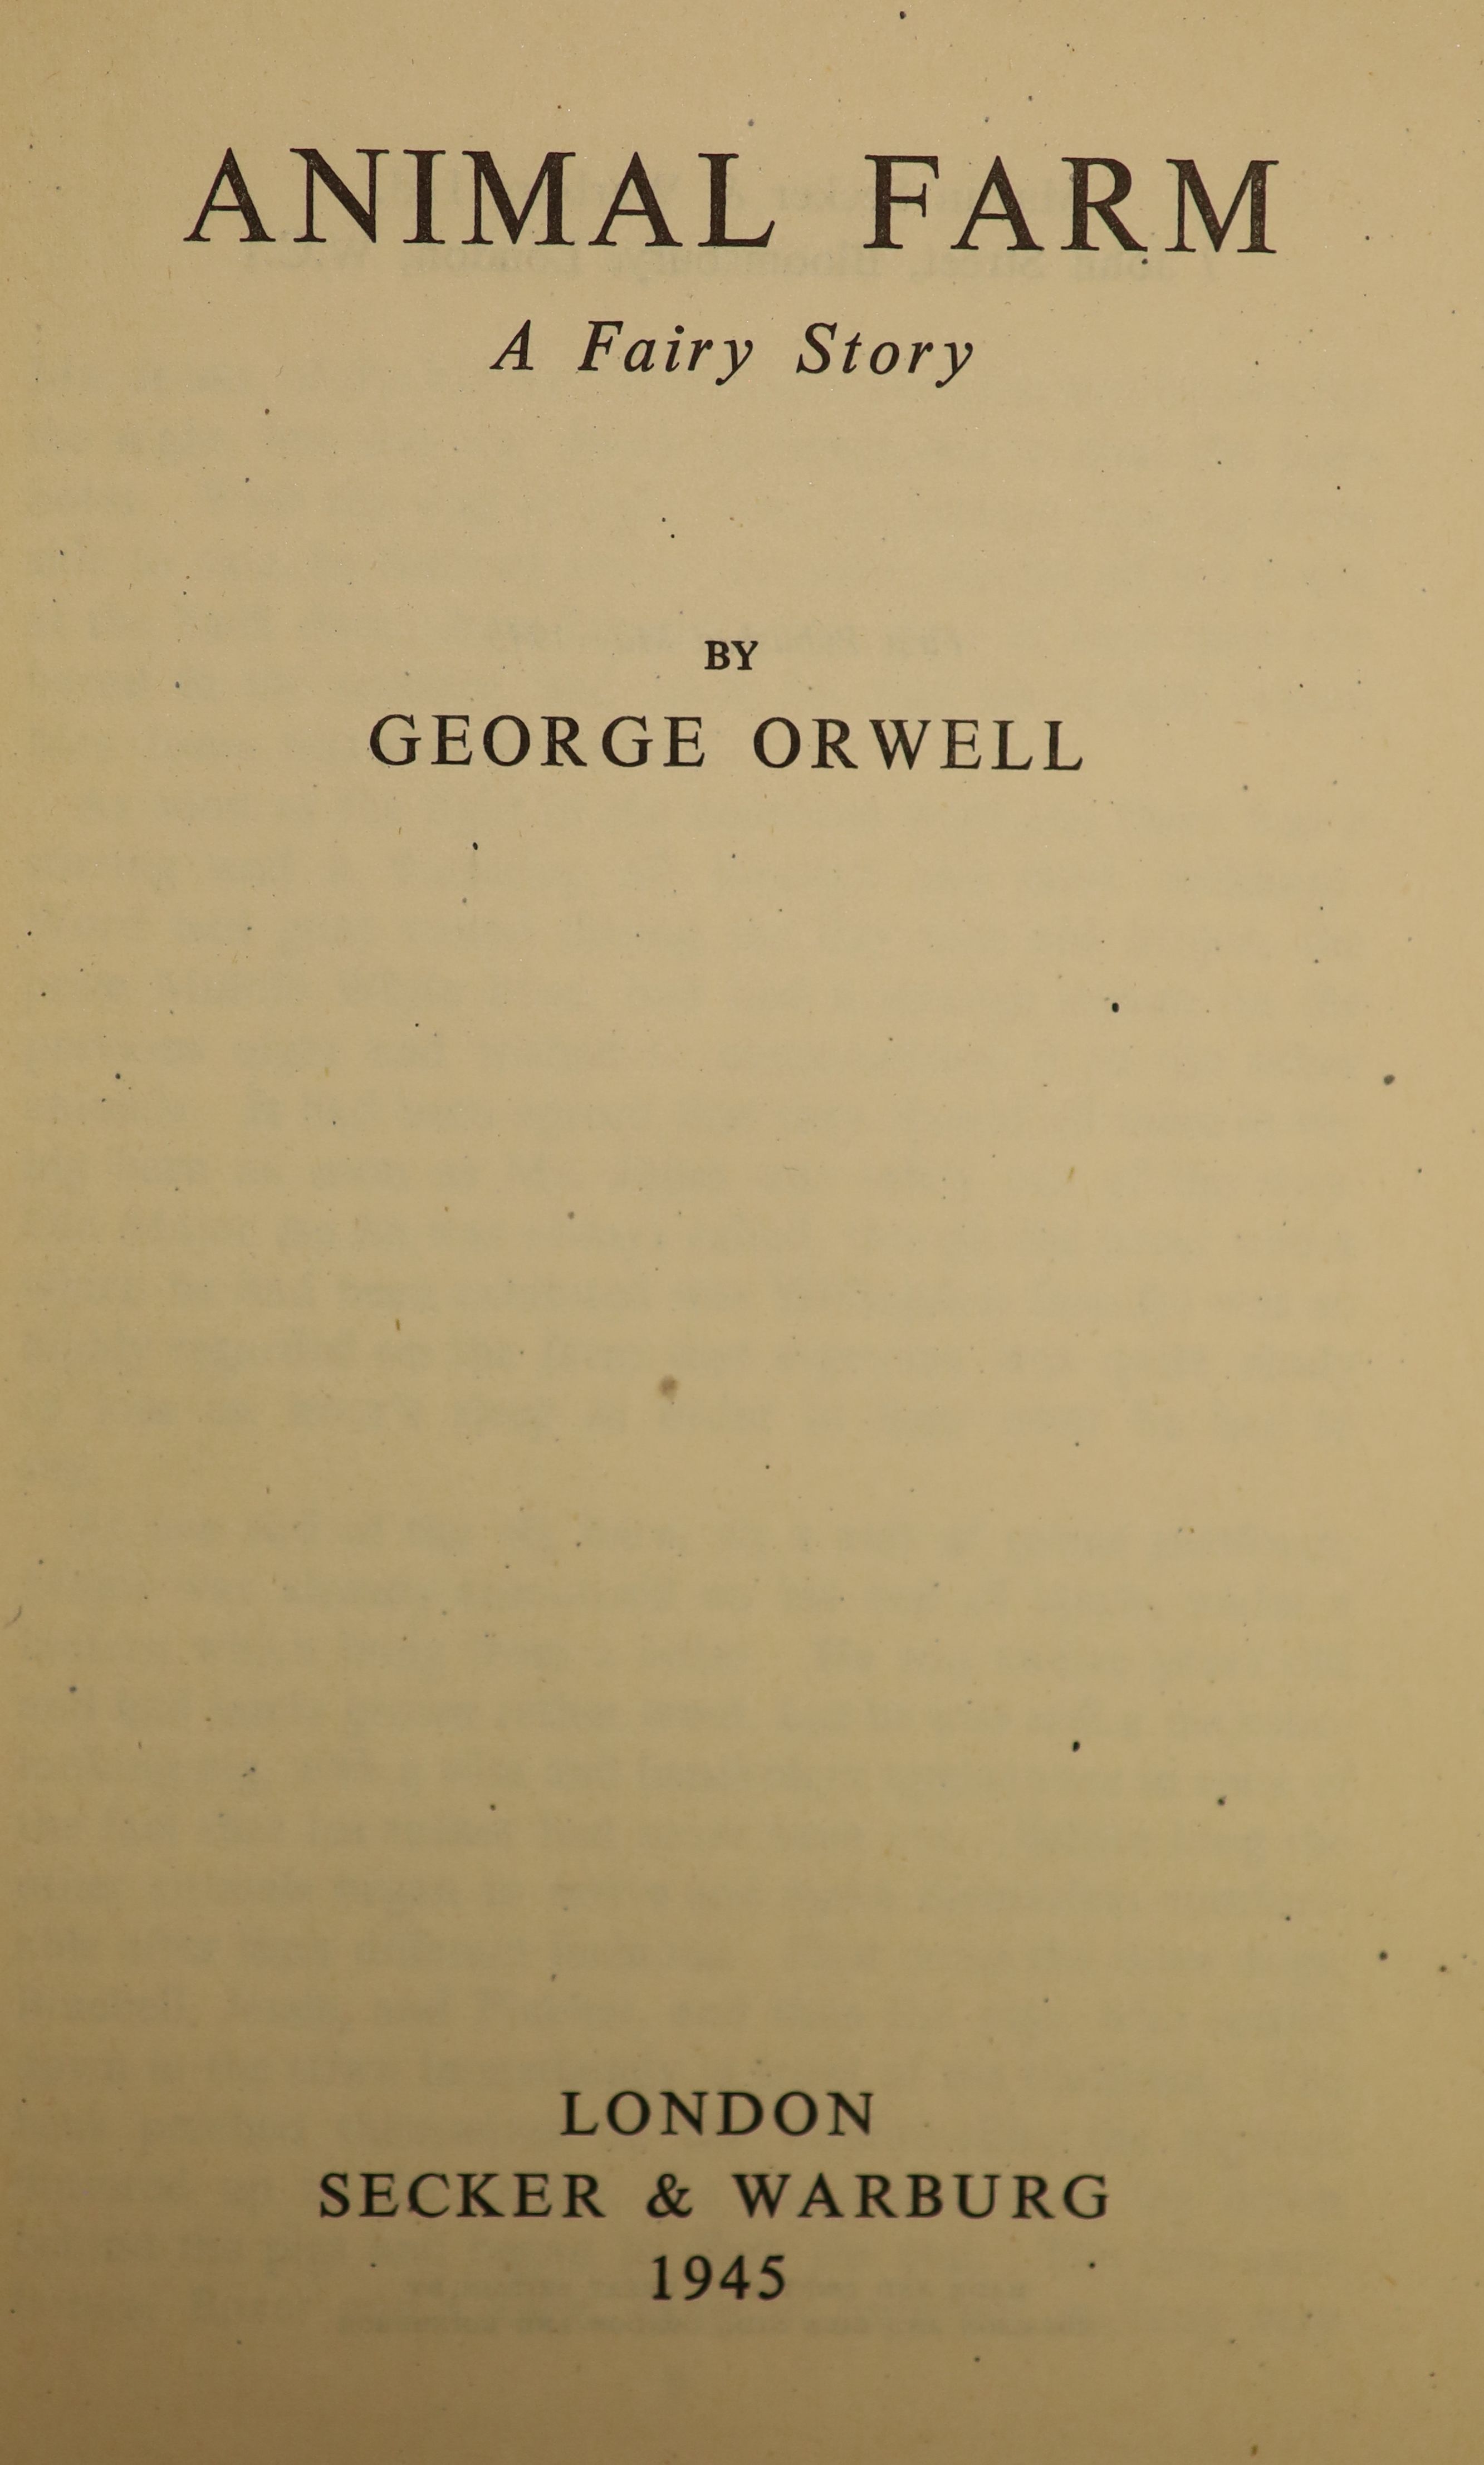 Orwell, George - 4 works - Animal Farm, 1st edition, 1st impression, original green, cloth, spine sunned, London, 1945; Nineteen Eighty Four, (2 copies), both 1st editions, in original cloth, spines sunned and spotted, L